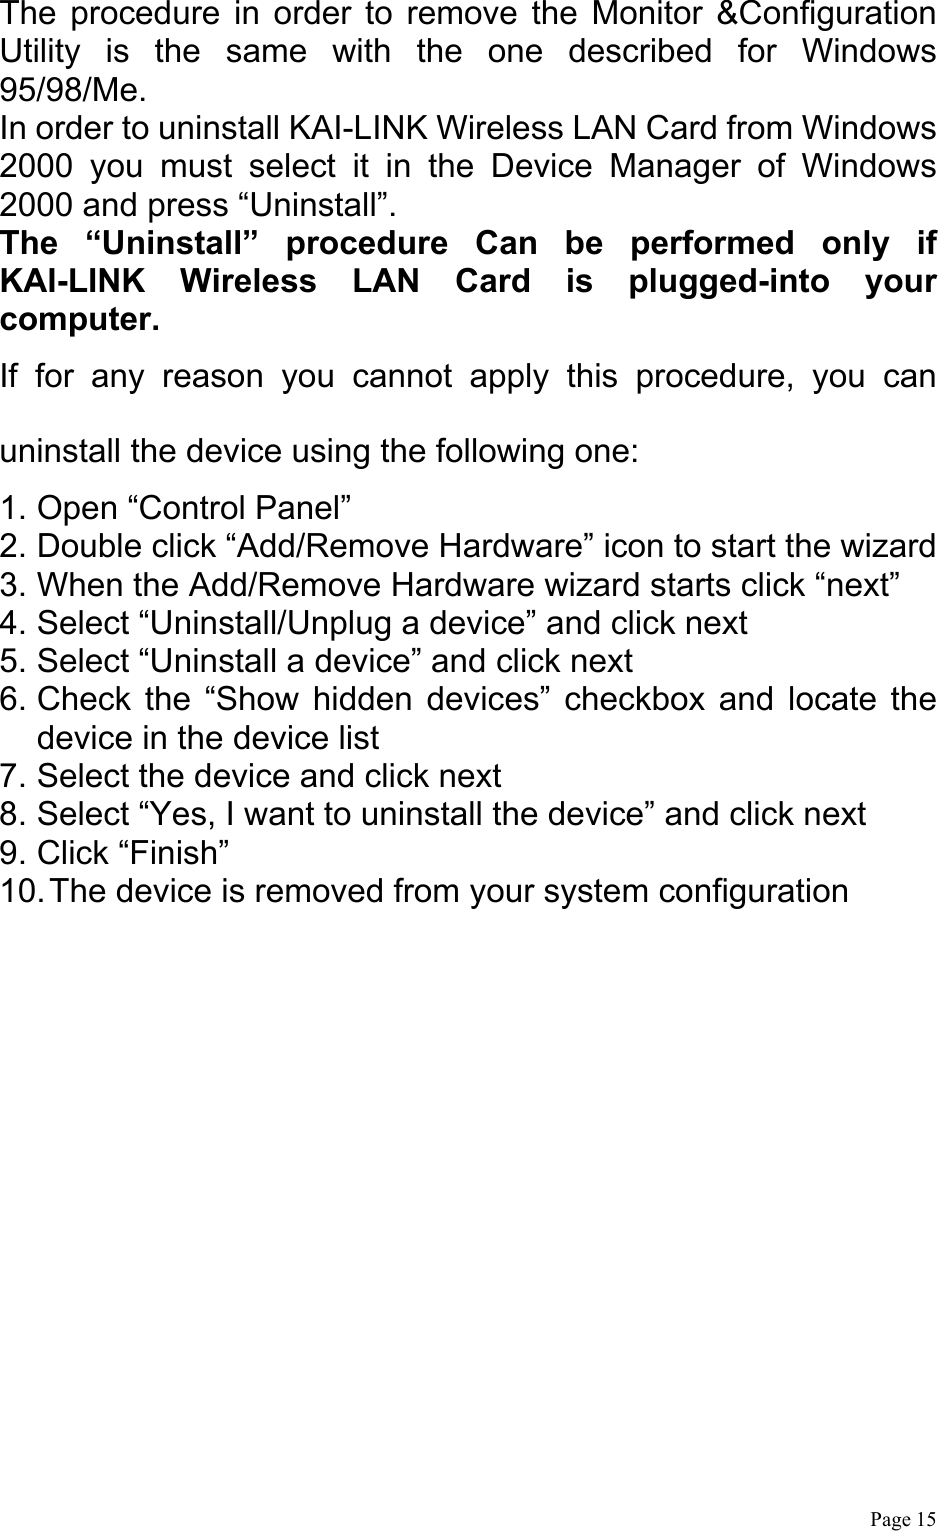  Page 15 The procedure in order to remove the Monitor &amp;Configuration Utility is the same with the one described for Windows 95/98/Me. In order to uninstall KAI-LINK Wireless LAN Card from Windows 2000 you must select it in the Device Manager of Windows 2000 and press “Uninstall”.     The “Uninstall” procedure Can be performed only if KAI-LINK Wireless LAN Card is plugged-into your computer. If for any reason you cannot apply this procedure, you can uninstall the device using the following one: 1. Open “Control Panel” 2. Double click “Add/Remove Hardware” icon to start the wizard 3. When the Add/Remove Hardware wizard starts click “next” 4. Select “Uninstall/Unplug a device” and click next 5. Select “Uninstall a device” and click next 6. Check the “Show hidden devices” checkbox and locate the device in the device list 7. Select the device and click next 8. Select “Yes, I want to uninstall the device” and click next 9. Click “Finish” 10. The device is removed from your system configuration  